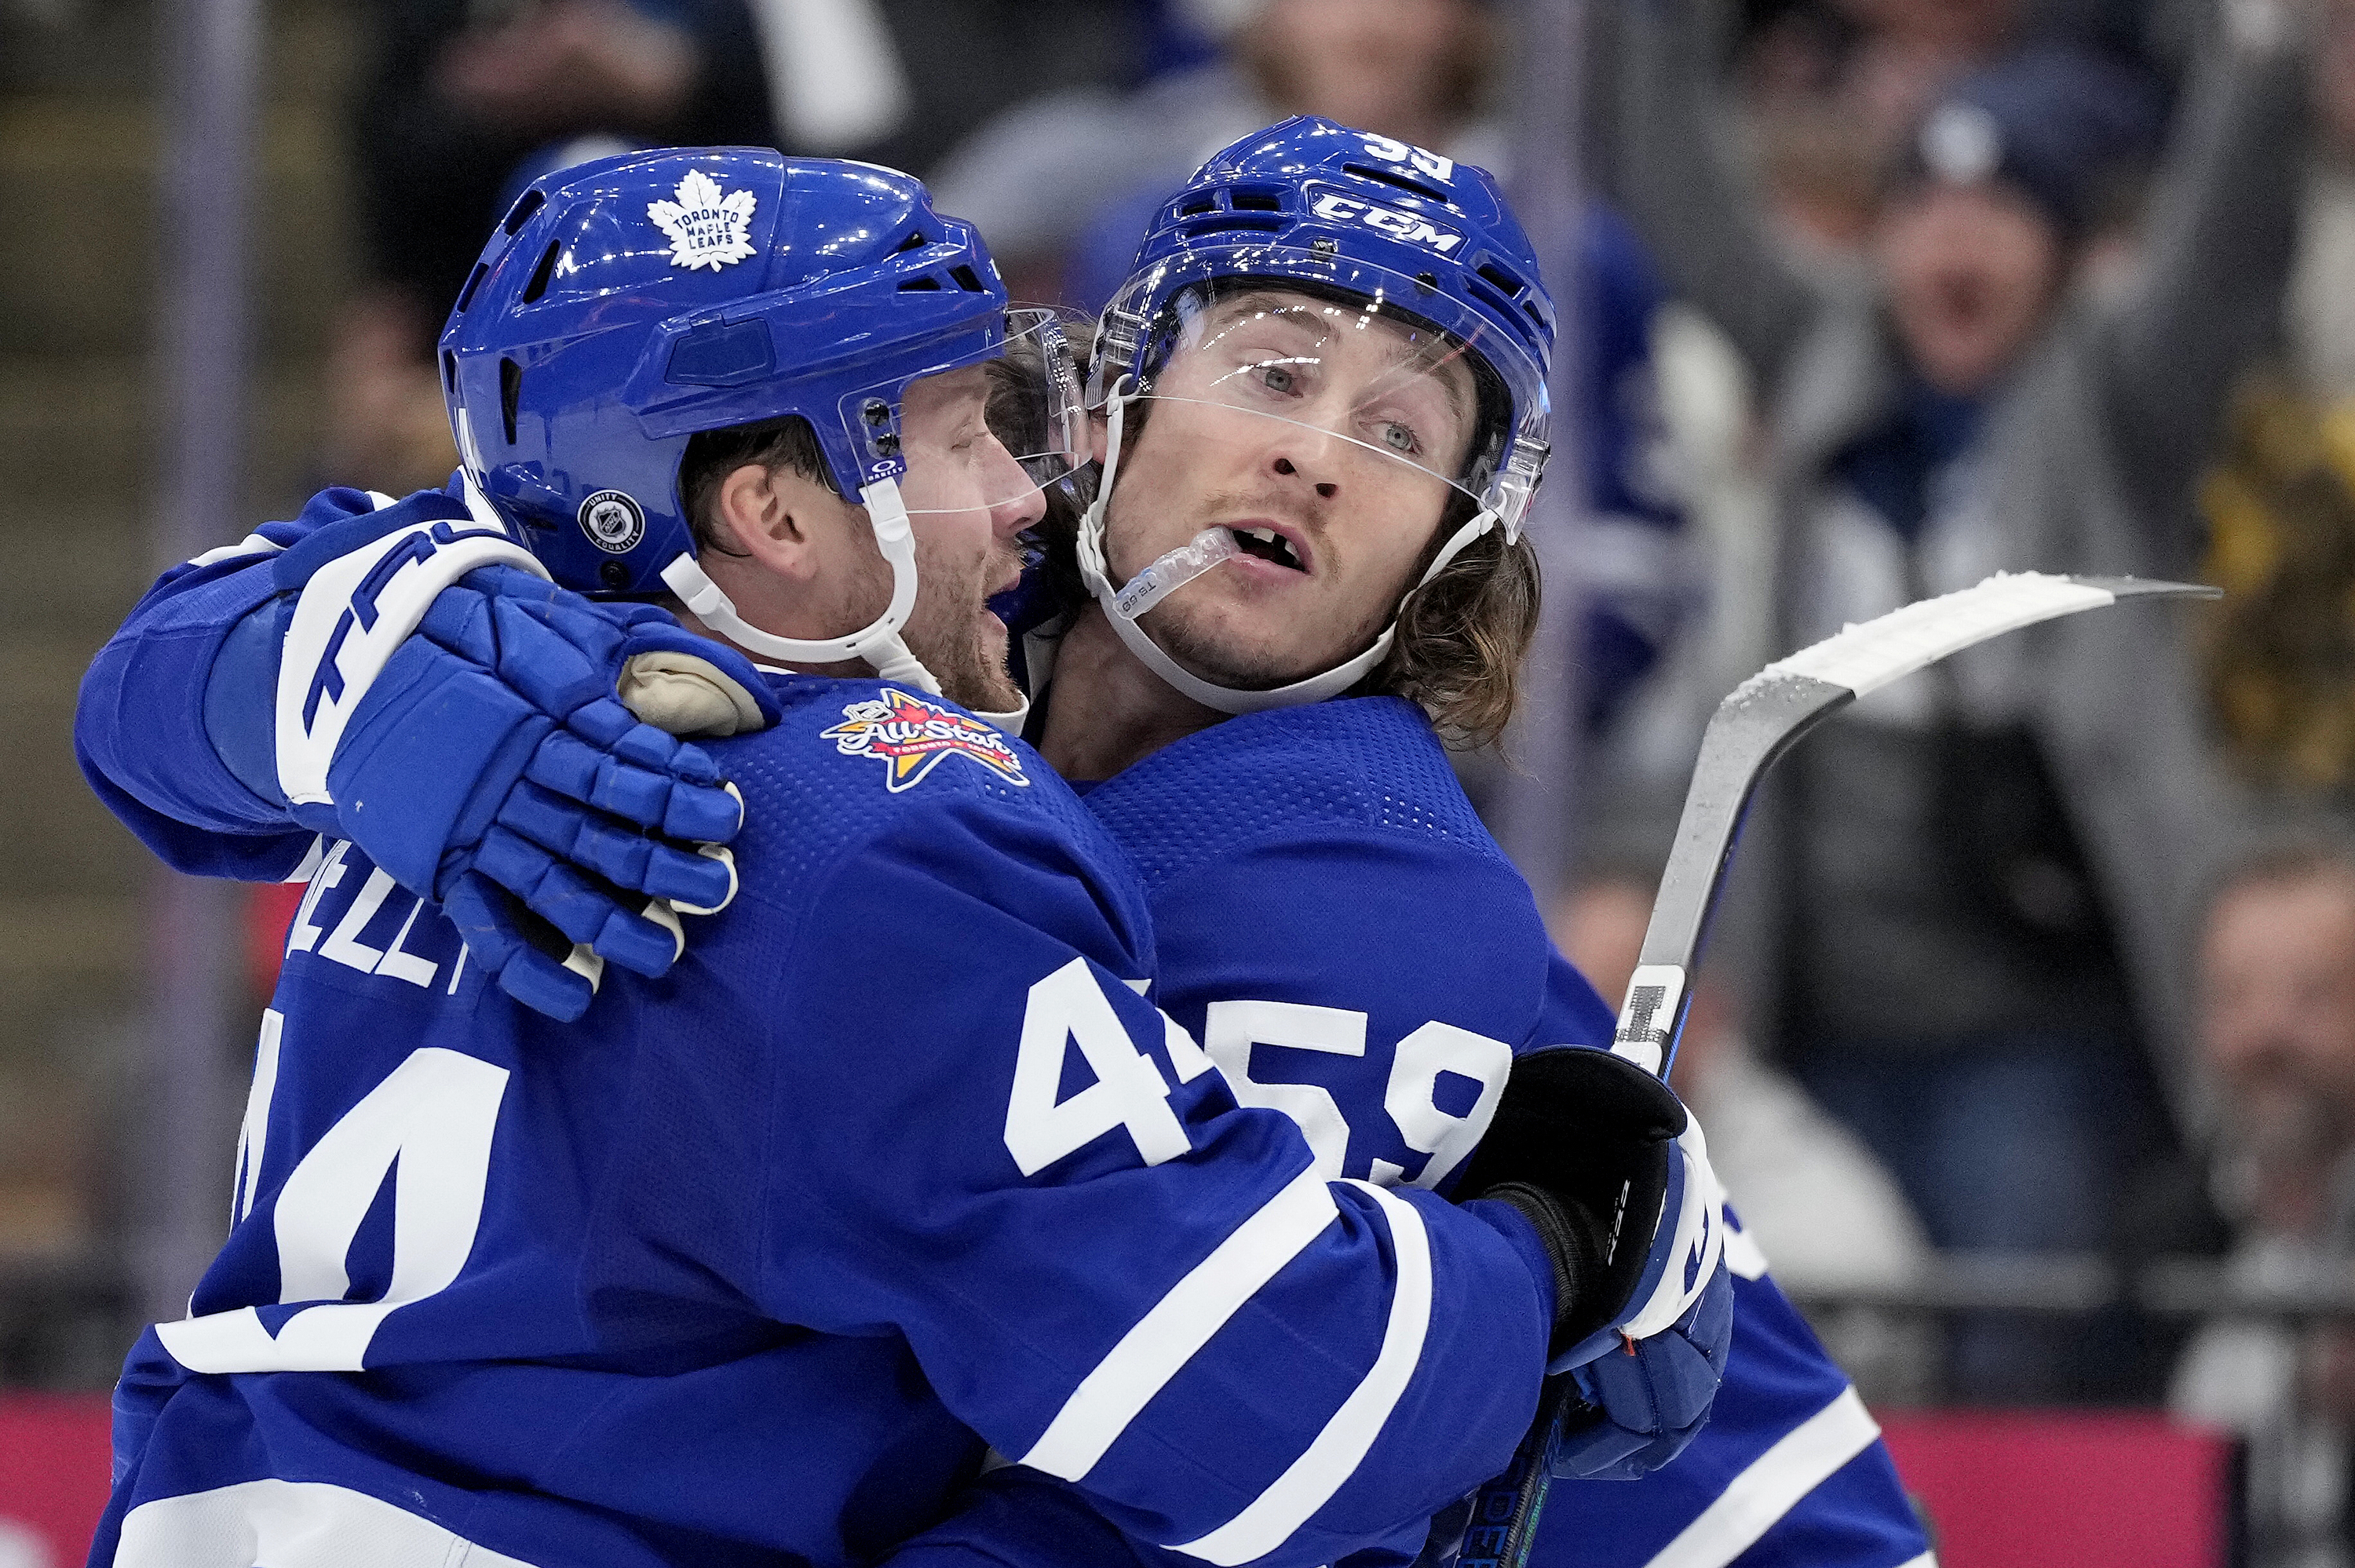 Category 5: Trade deadline, reunions as Hurricanes face Leafs